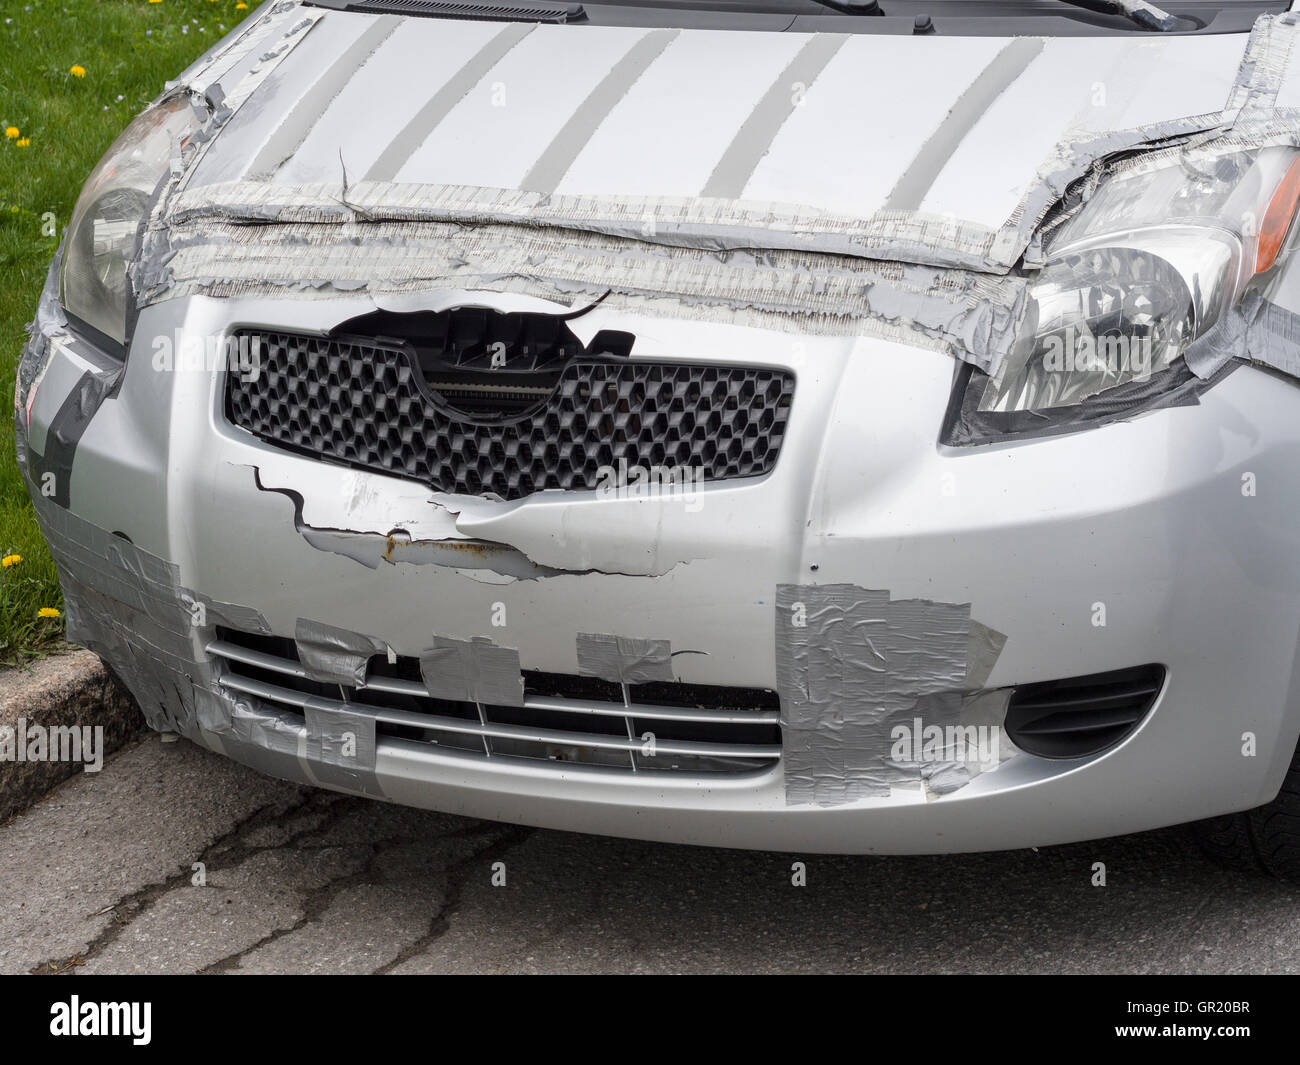 Damaged front bumper cover and grill : r/Detailing